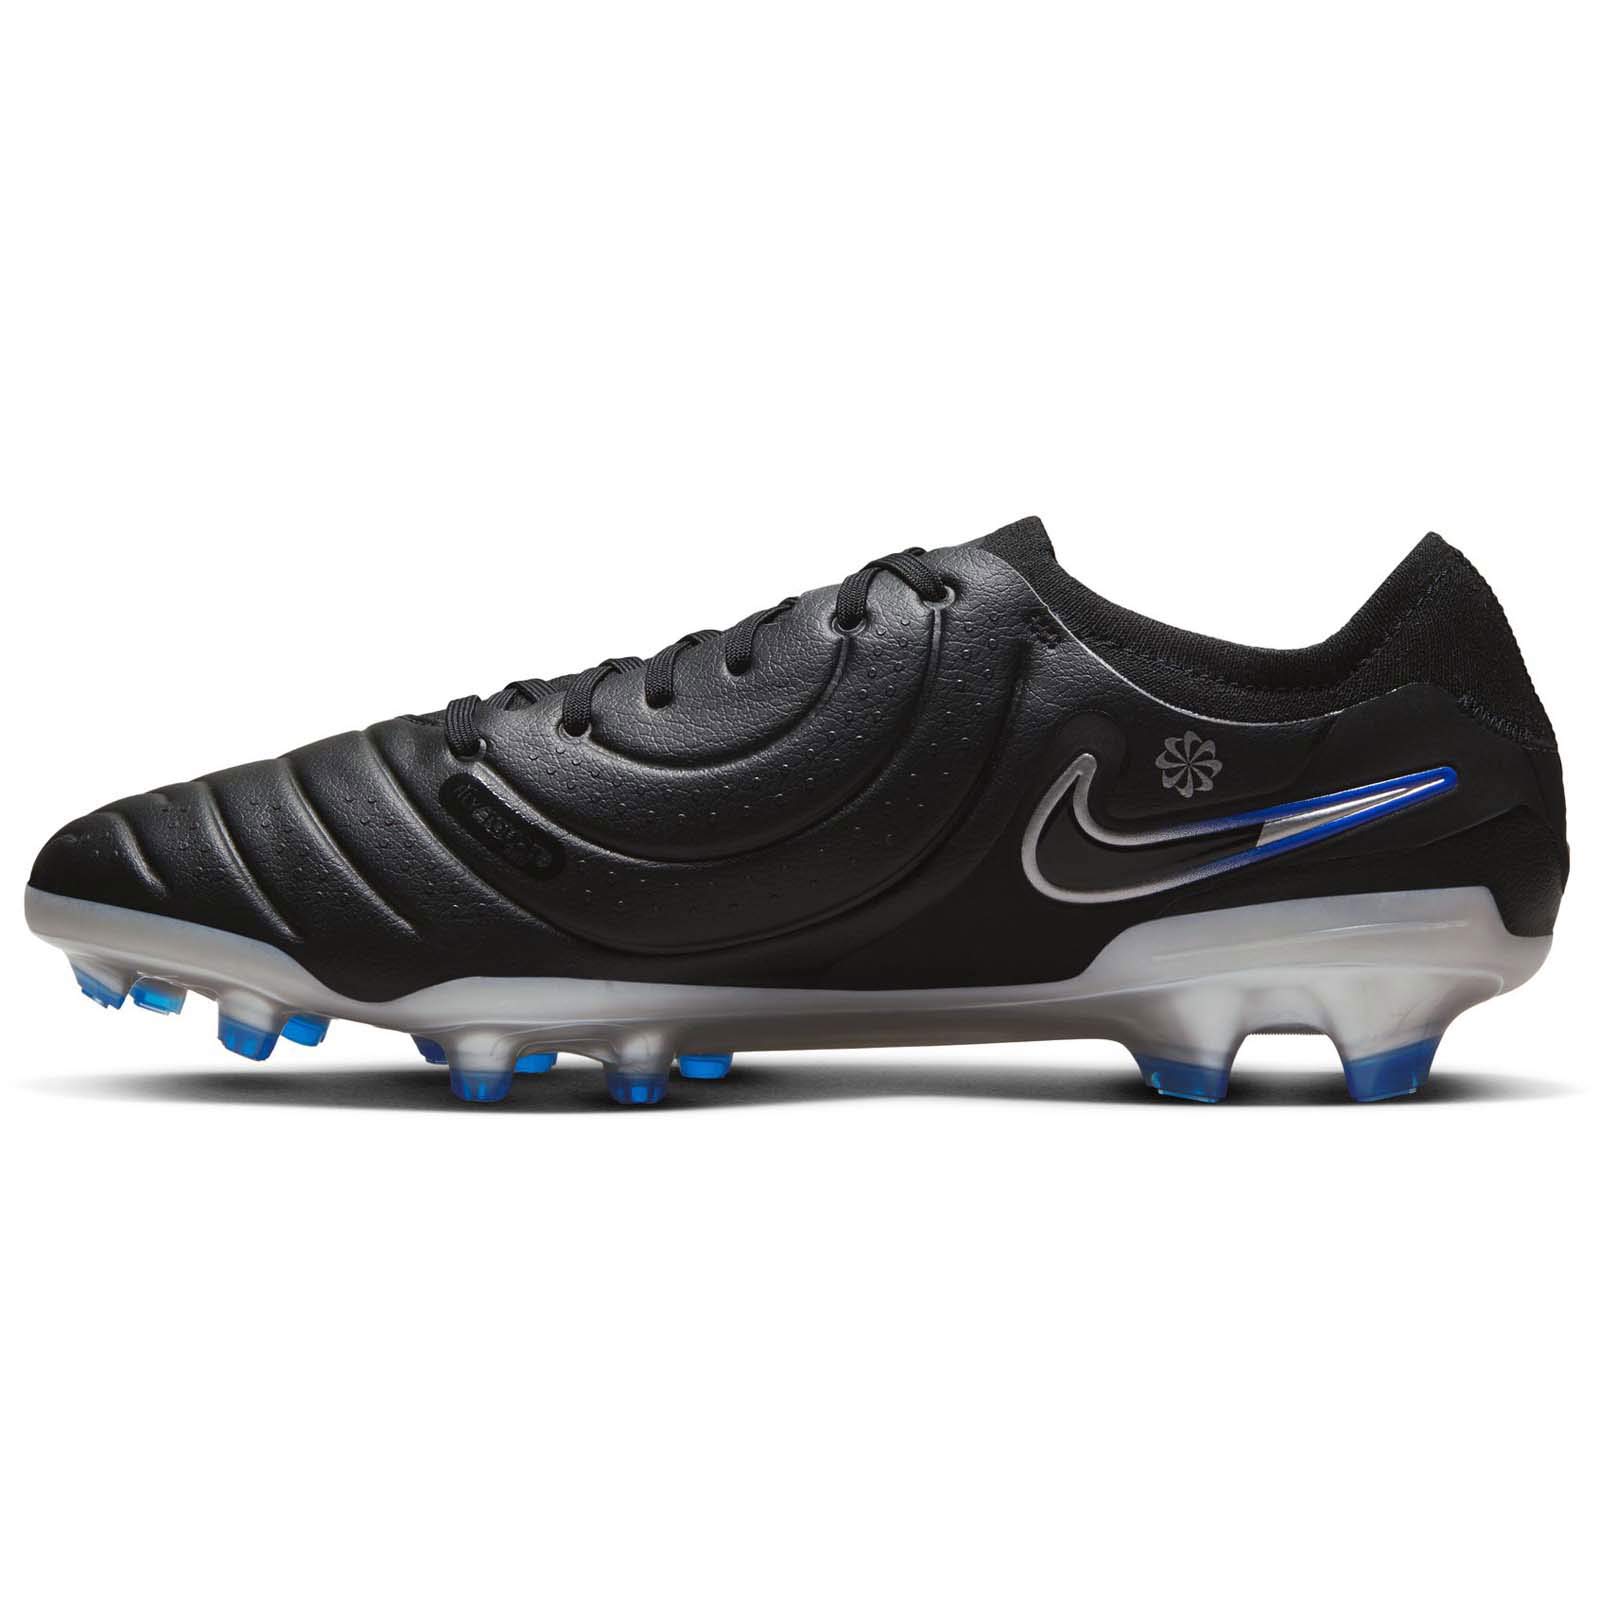 NIKE TIEMPO LEGEND 10 PRO FIRM-GROUND FOOTBALL BOOT